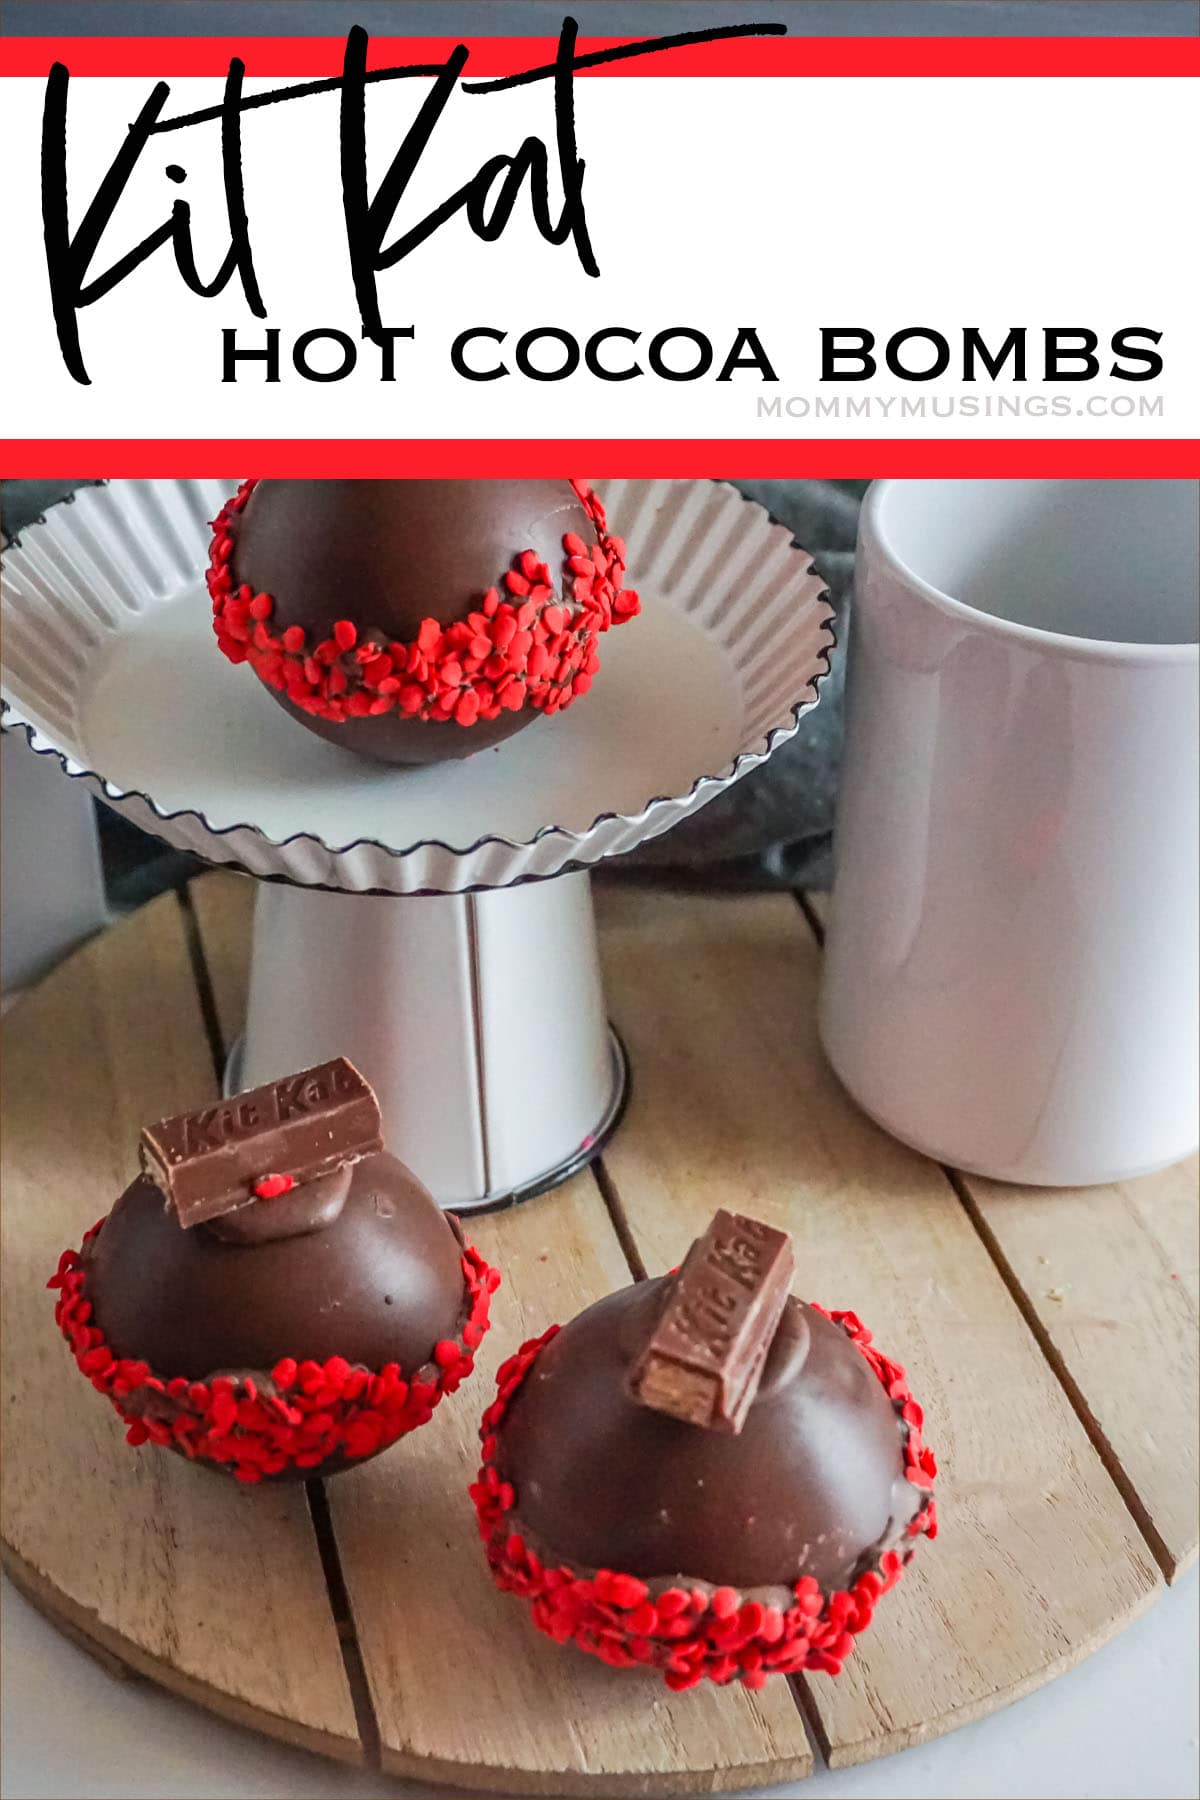 easy hot chocolate bomb recipe with text which reads kit kat hot cocoa bombs